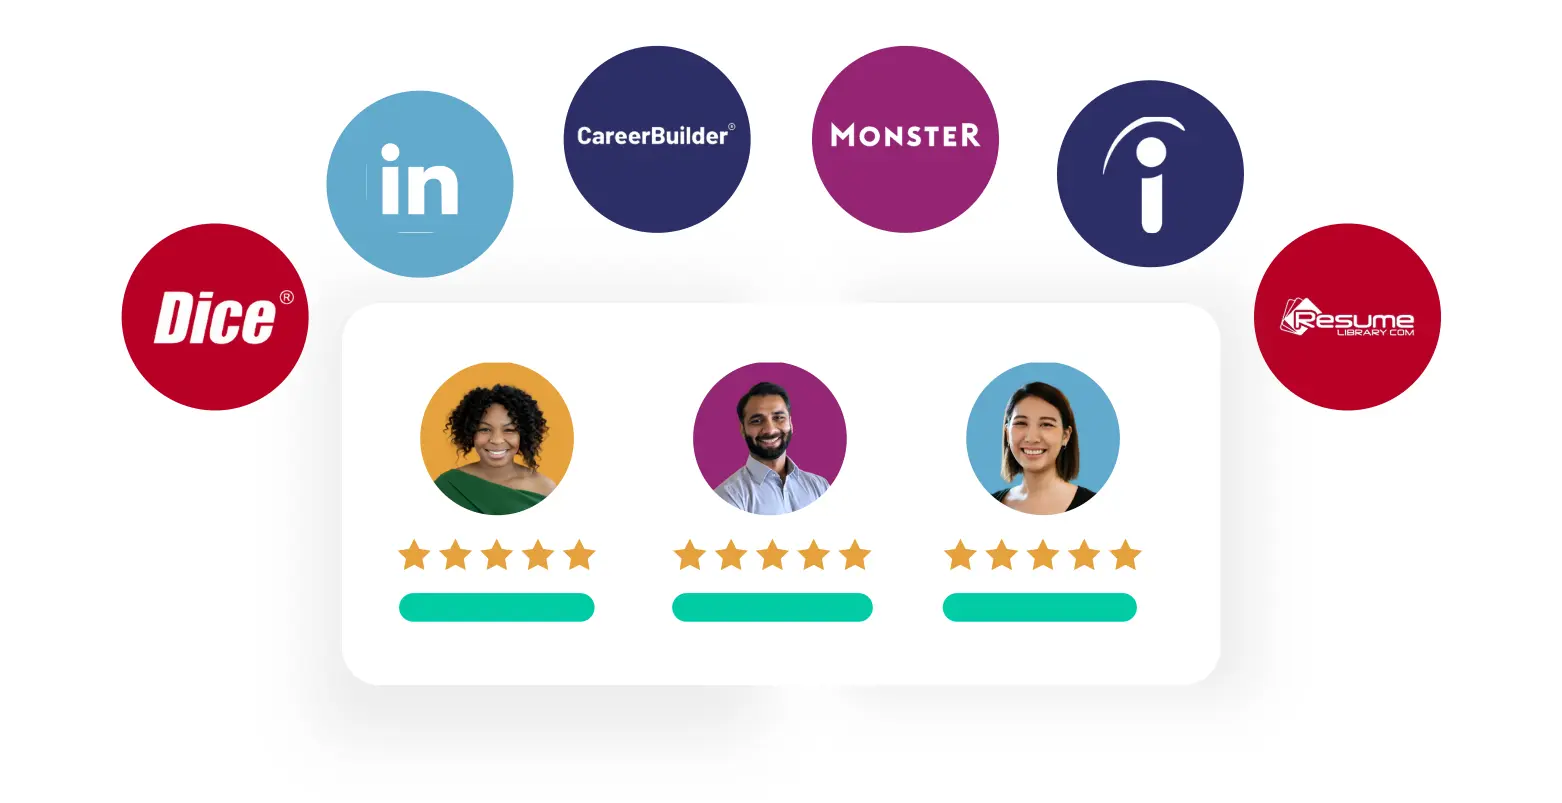 A graphic showing logos of job search platforms linked to profiles of smiling individuals. Platforms include LinkedIn, CareerBuilder, Monster, Indeed, Dice, and Resume Library. Each profile has a five-star rating and a progress bar underneath.